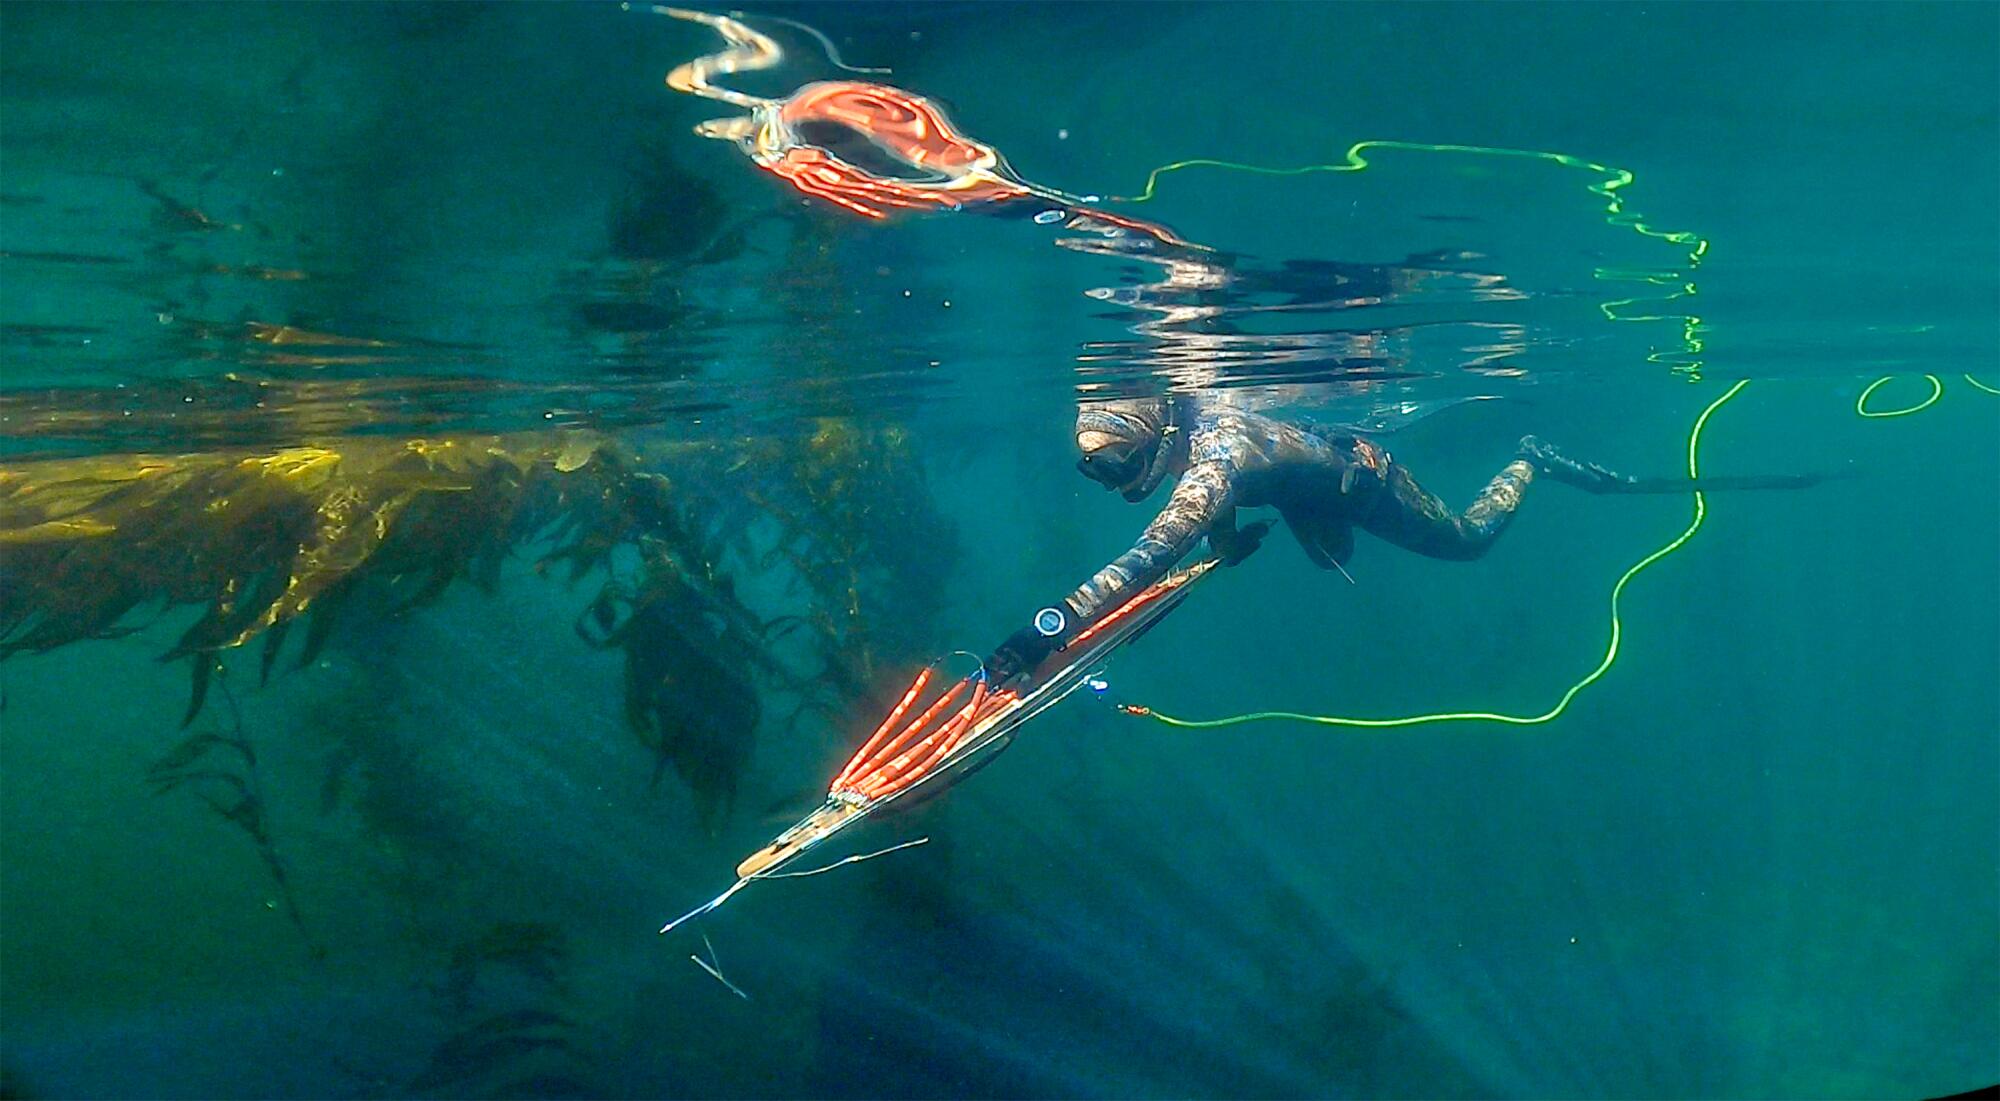 Spearfishing champ blazes trails for women divers, sustainability